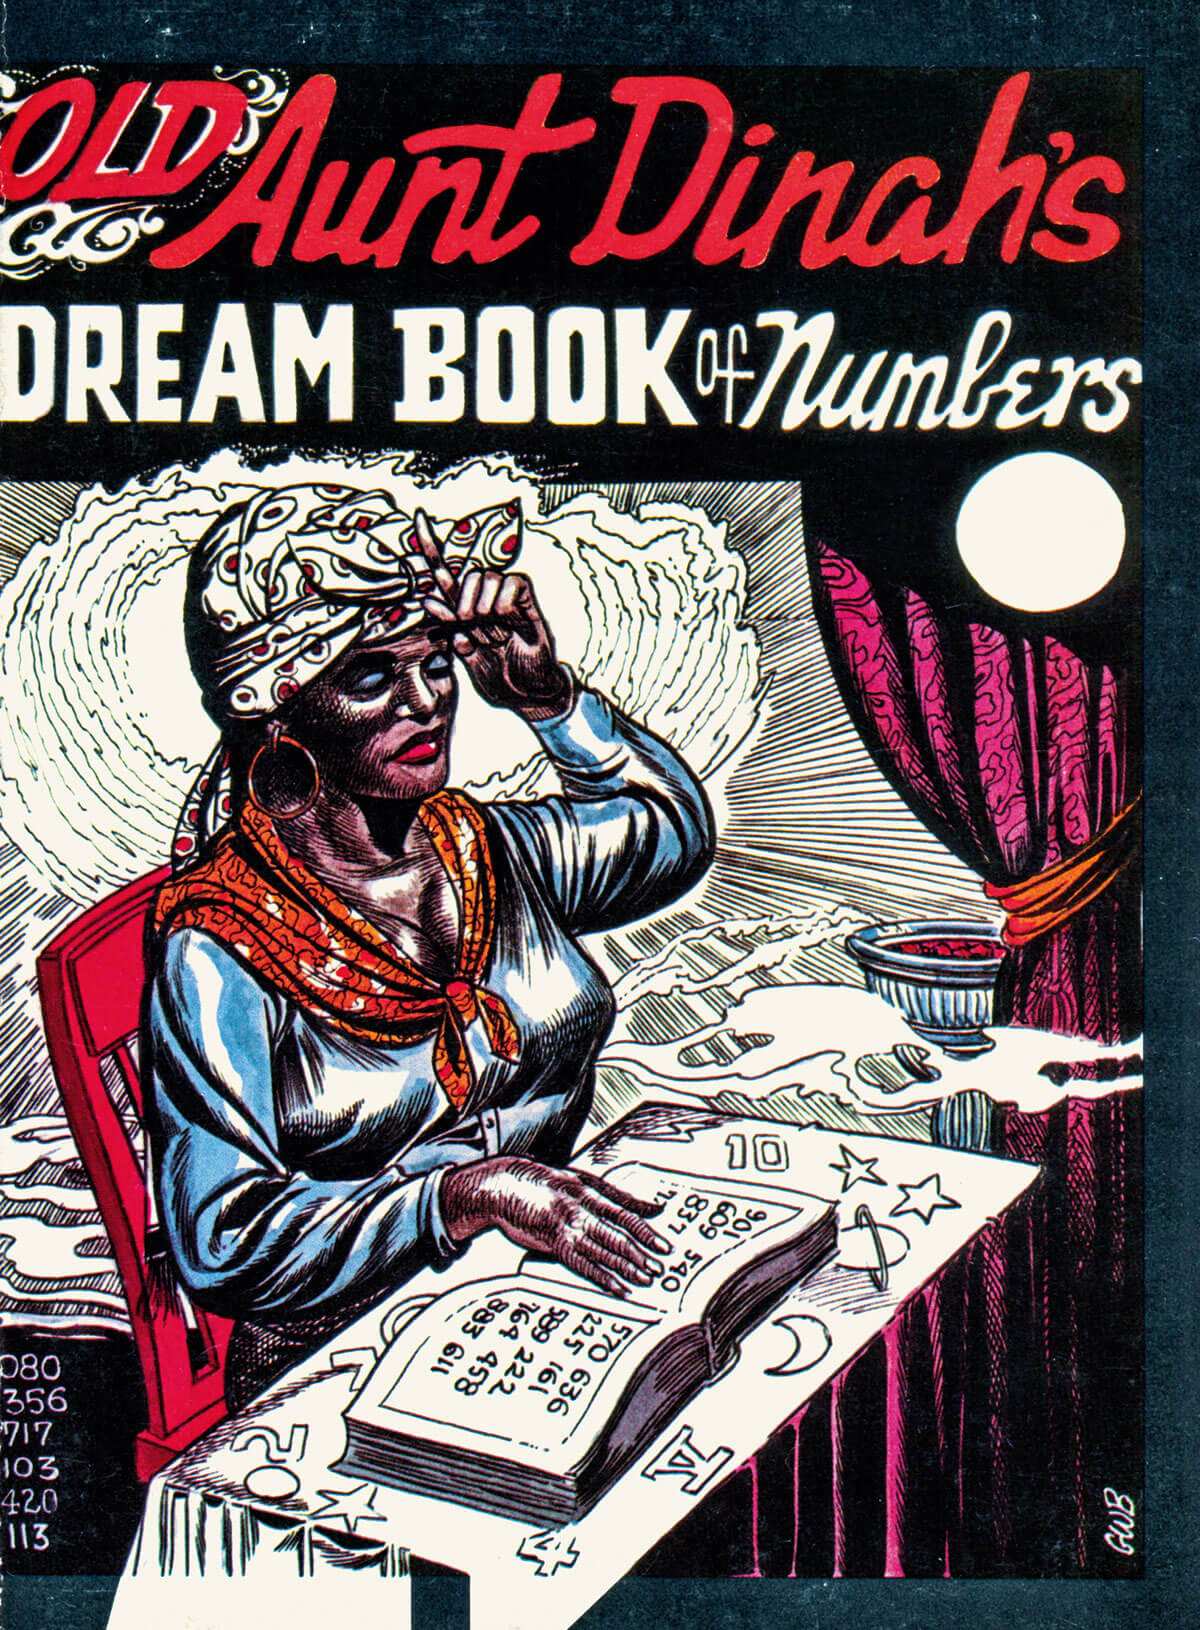 Eugene Bilbrew also provided the illustration for the front cover of Old Aunt Dinah’s Dream Book of Numbers, published by Wholesale in 1972. Though unrelated to the two “Aunt Dinah” dream books that had been published in the nineteenth century, the 1972 volume traded on the continuing popularity of the character within the genre.